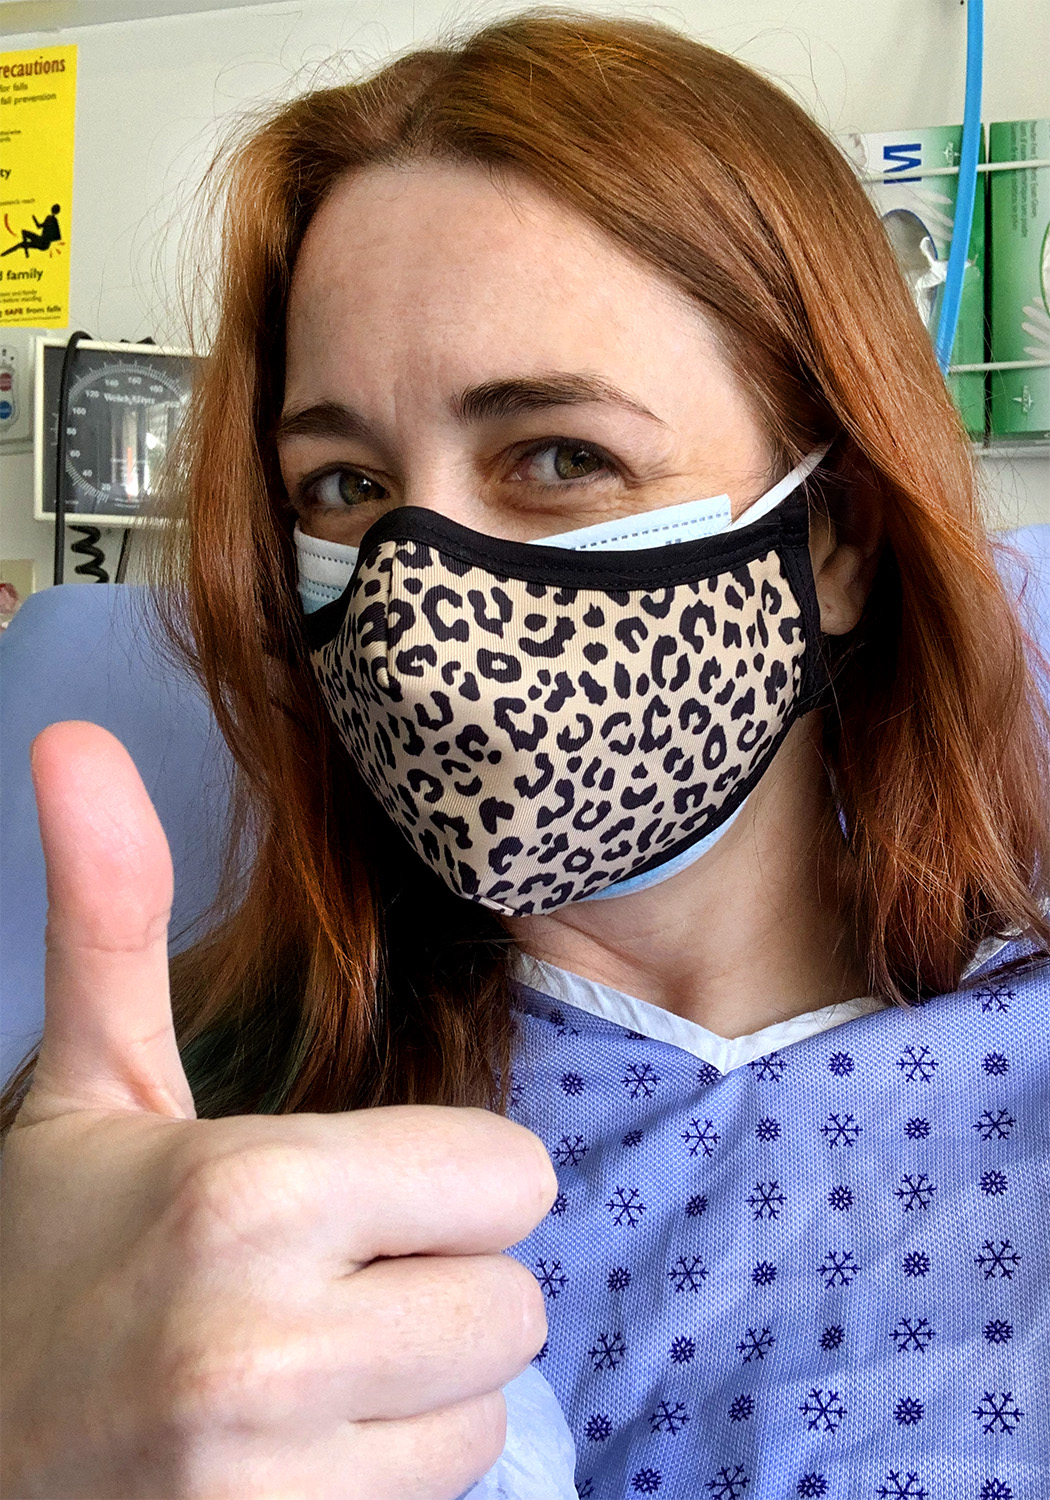 Rhiannon wearing two masks and a hospital gown doing thumbs up